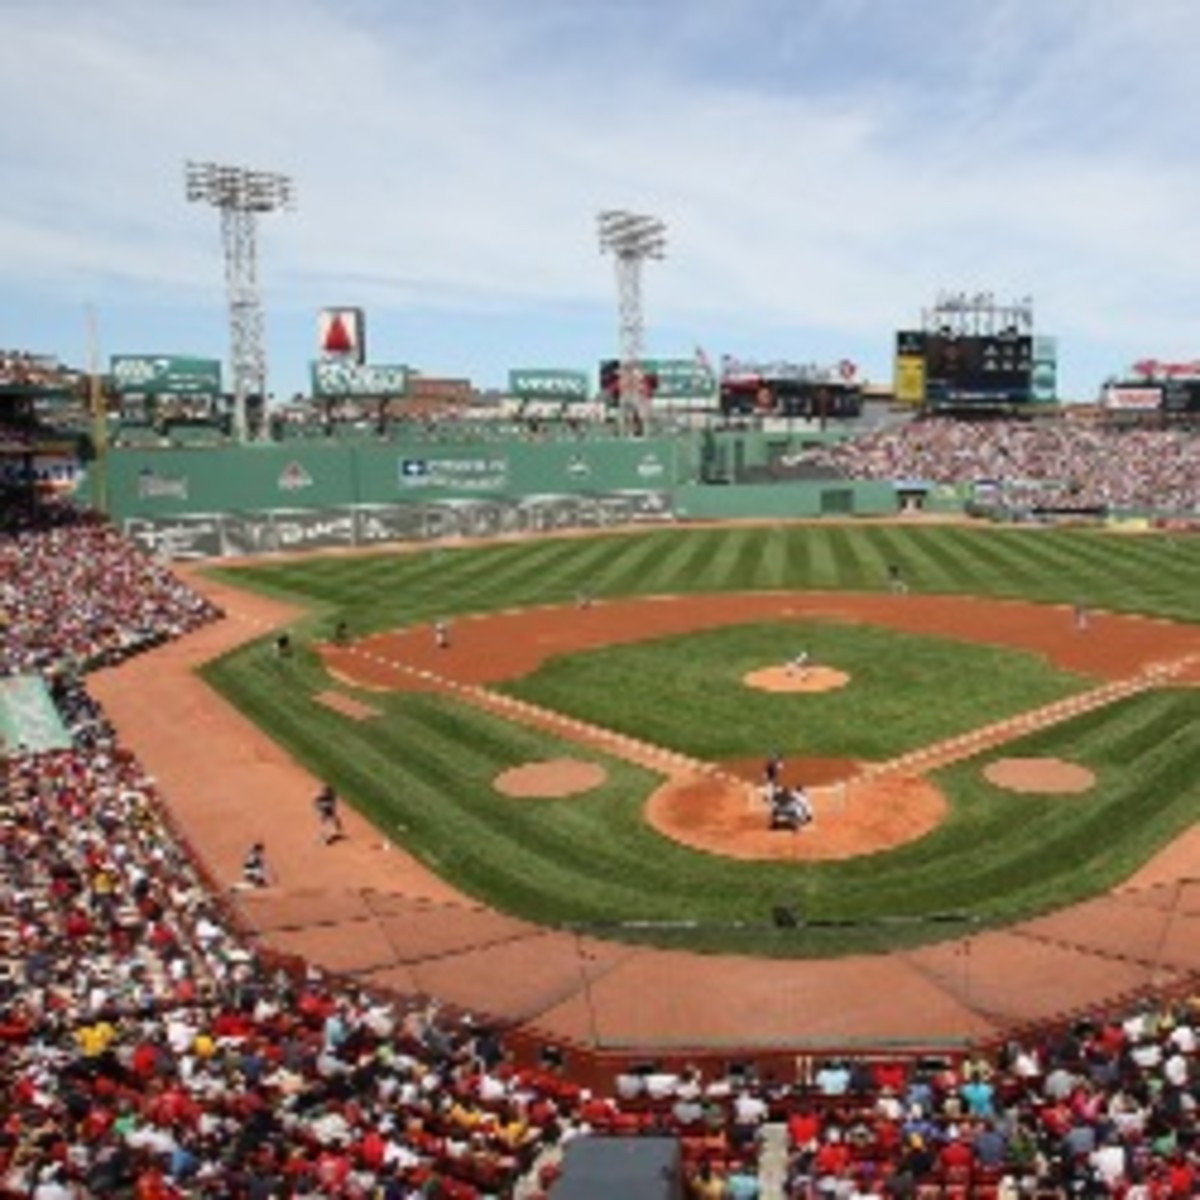 The sellout streak at Fenway Park ended at 794 regular season games. (J Rogash/Getty Images)